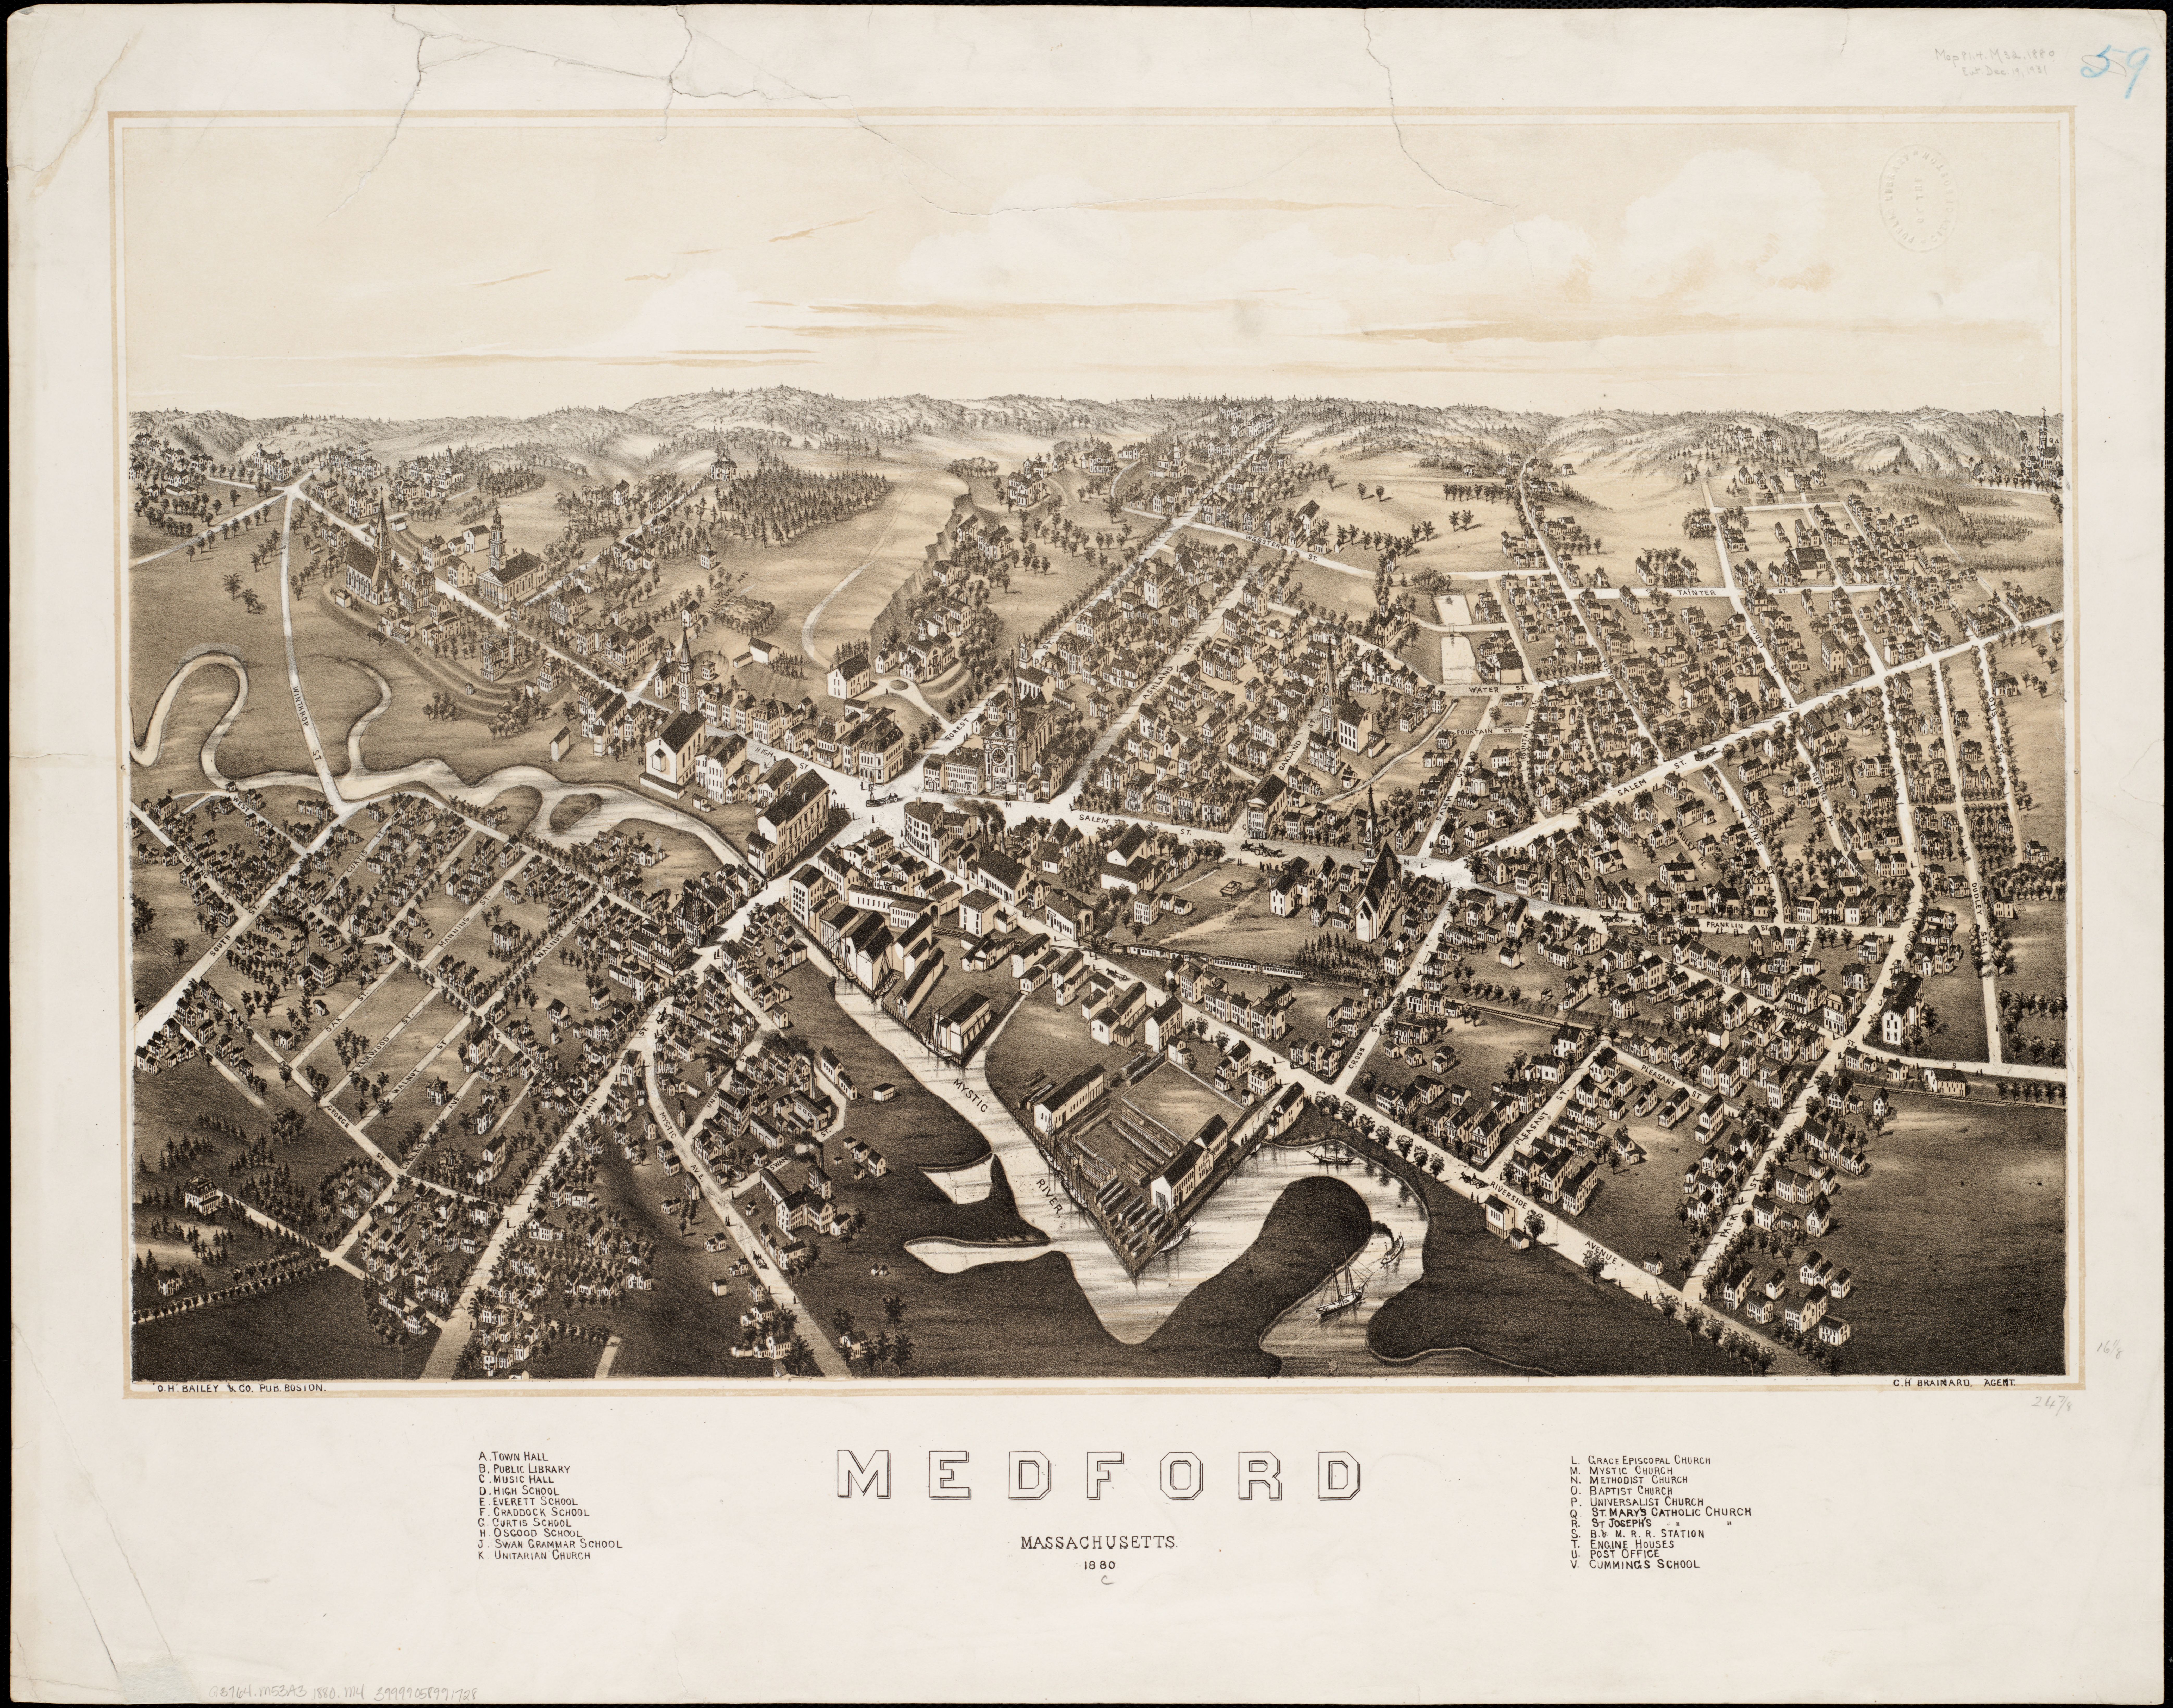 Continued Conversations: Mapping the Mystic River